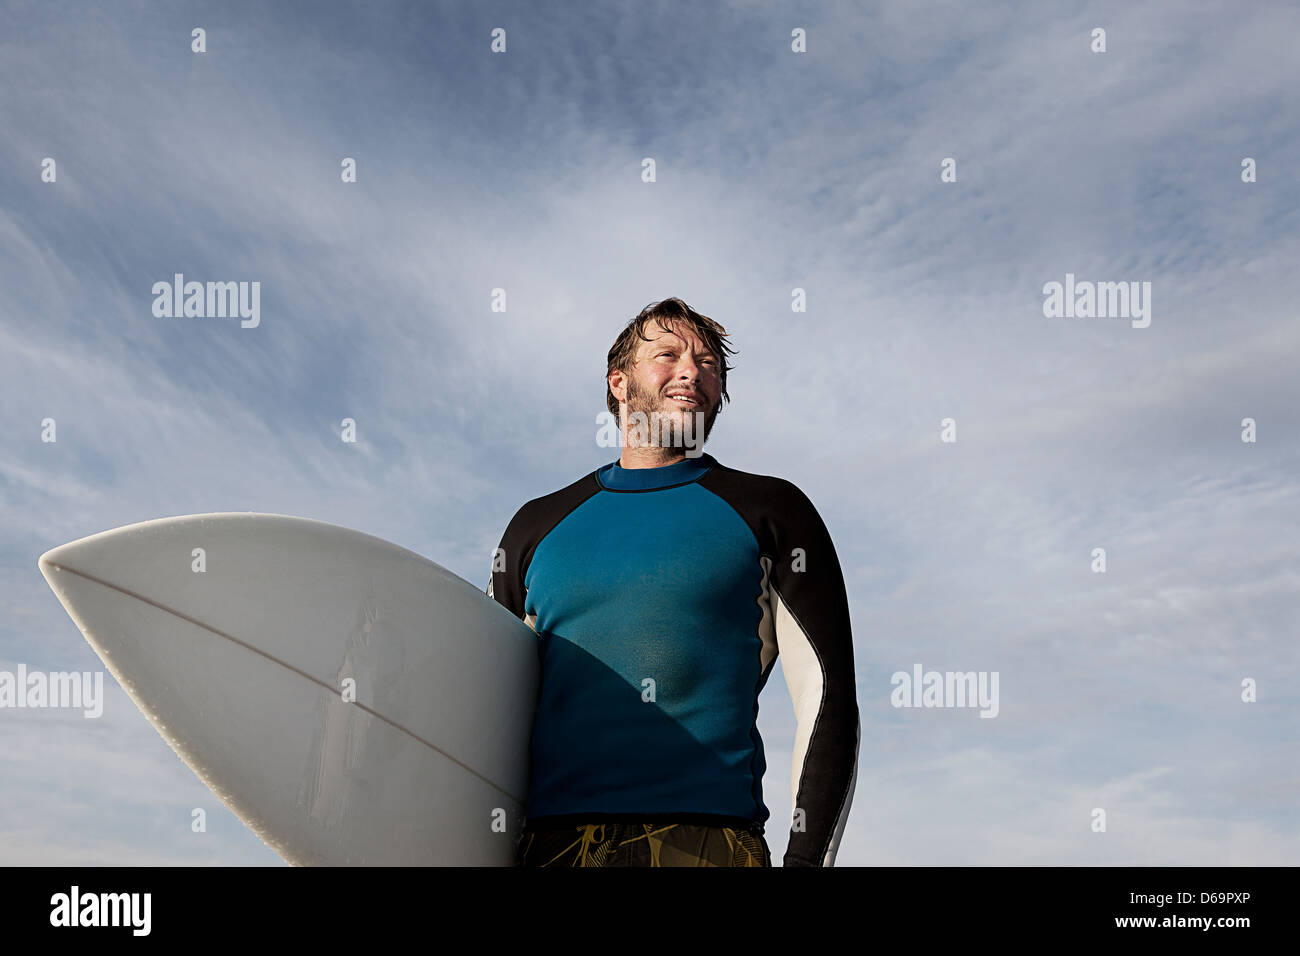 Surfer carrying board outdoors Stock Photo